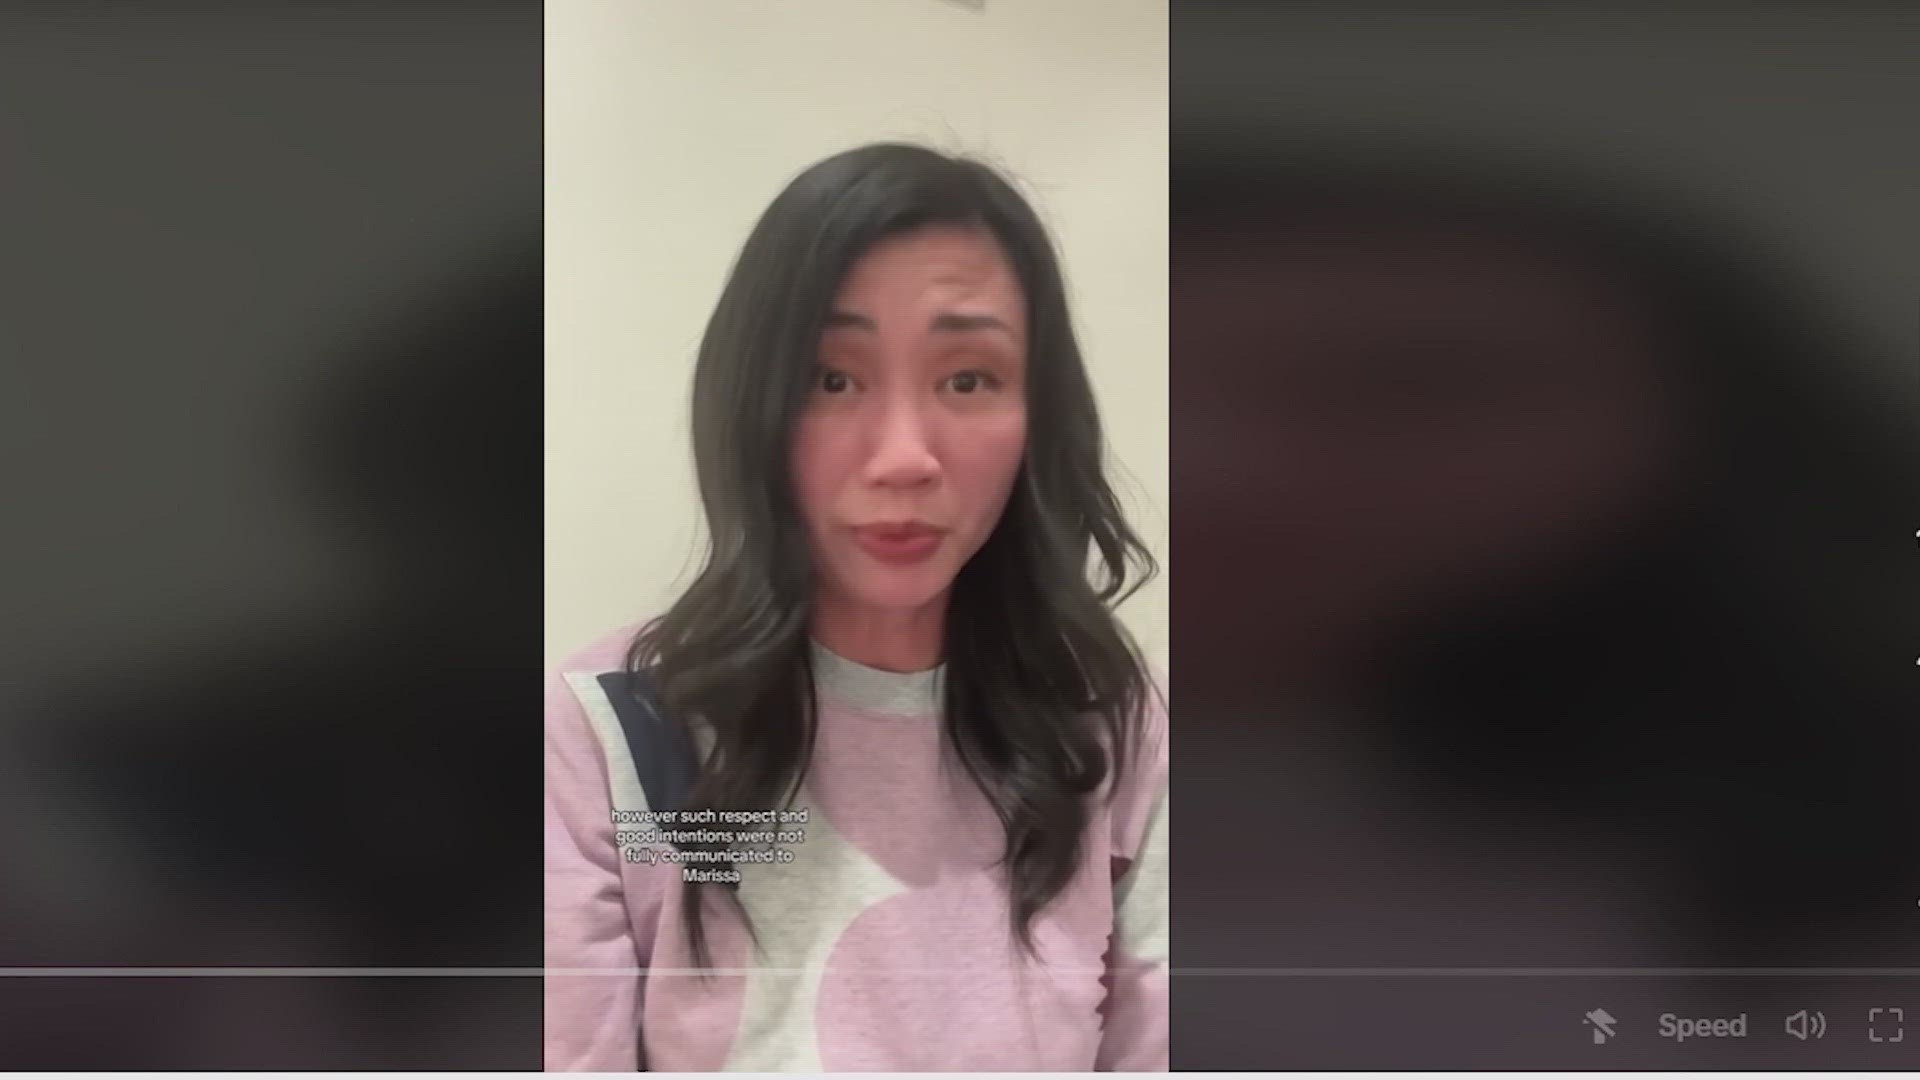 Kyte Baby CEO, Ying Liu, posted an apology to TikTok after a video claiming the company let go of an employee who was taking care of her adopted son in the NICU.